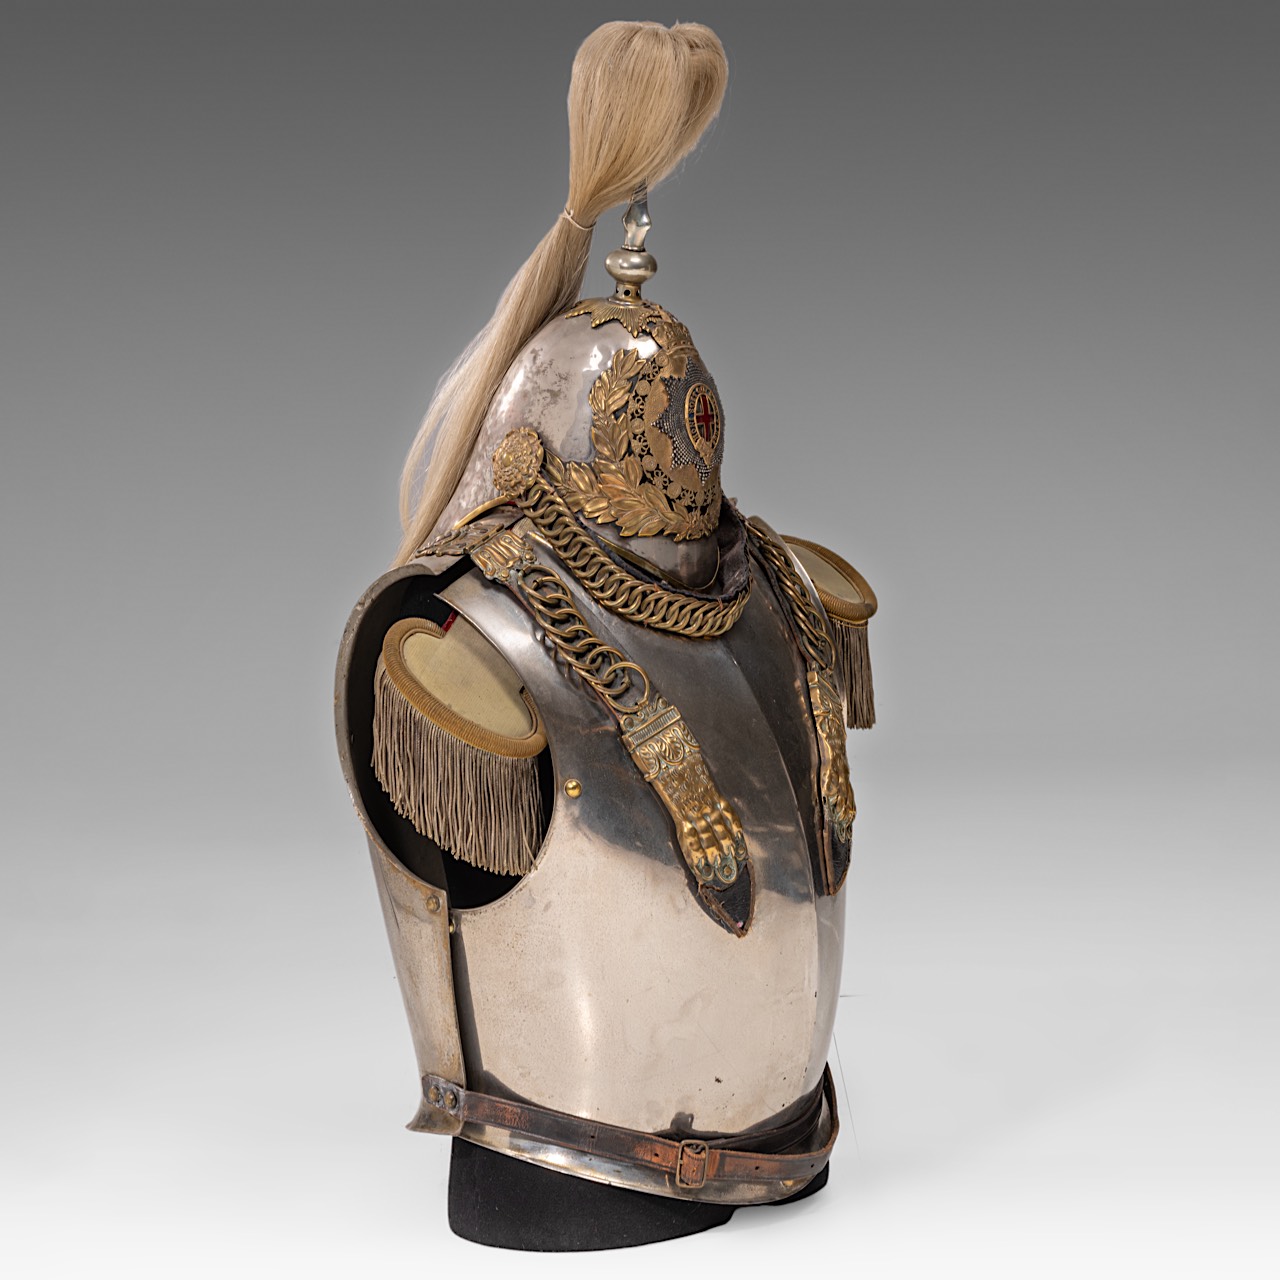 Cuirass and helmet of the Royal Horse Guards, metal and brass, Queen Victoria (1837-1901) - Image 7 of 8